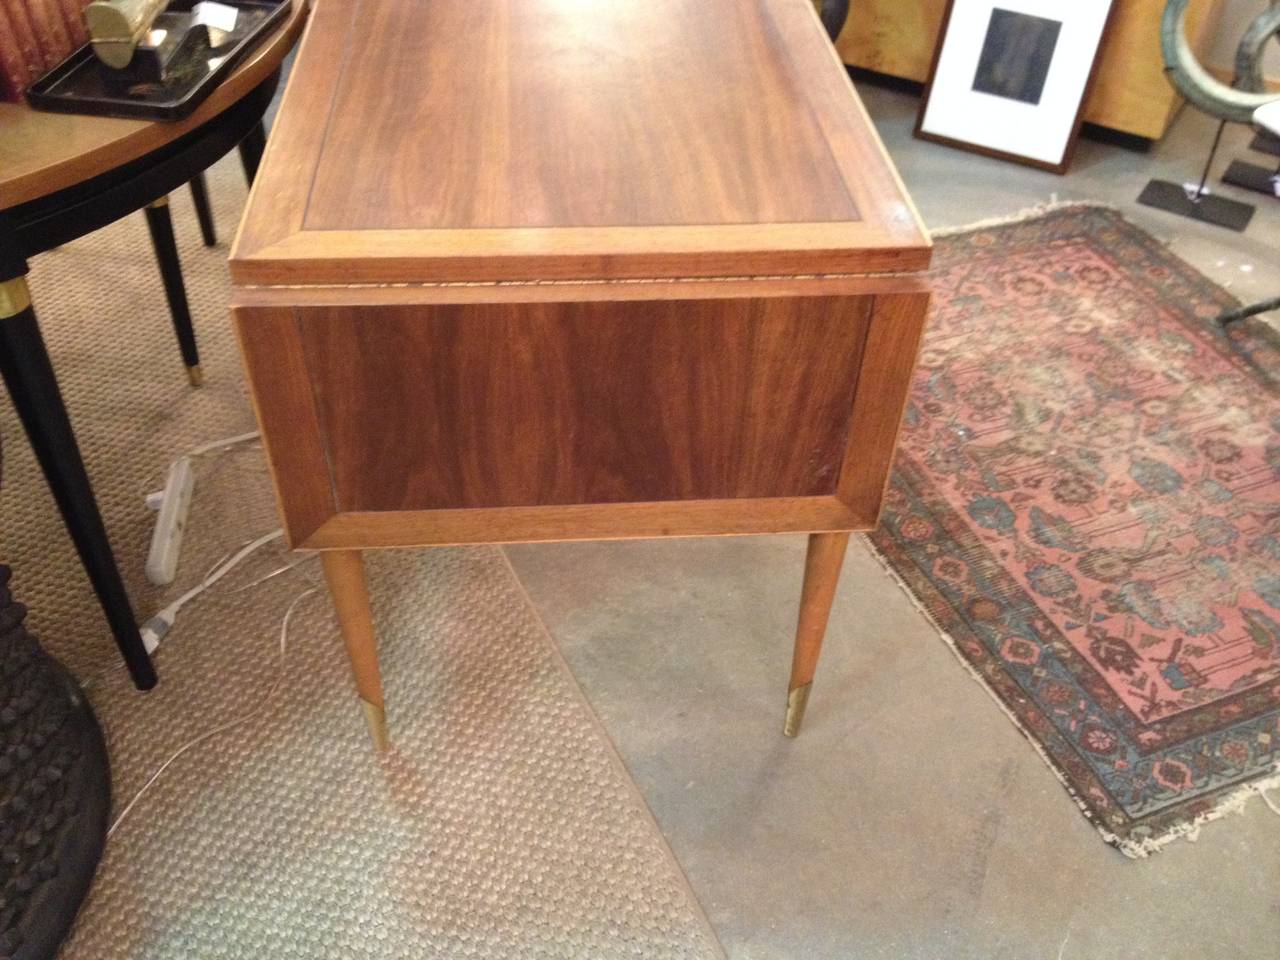 A mid-century desk by Lane attributed to Paul McCobb's 